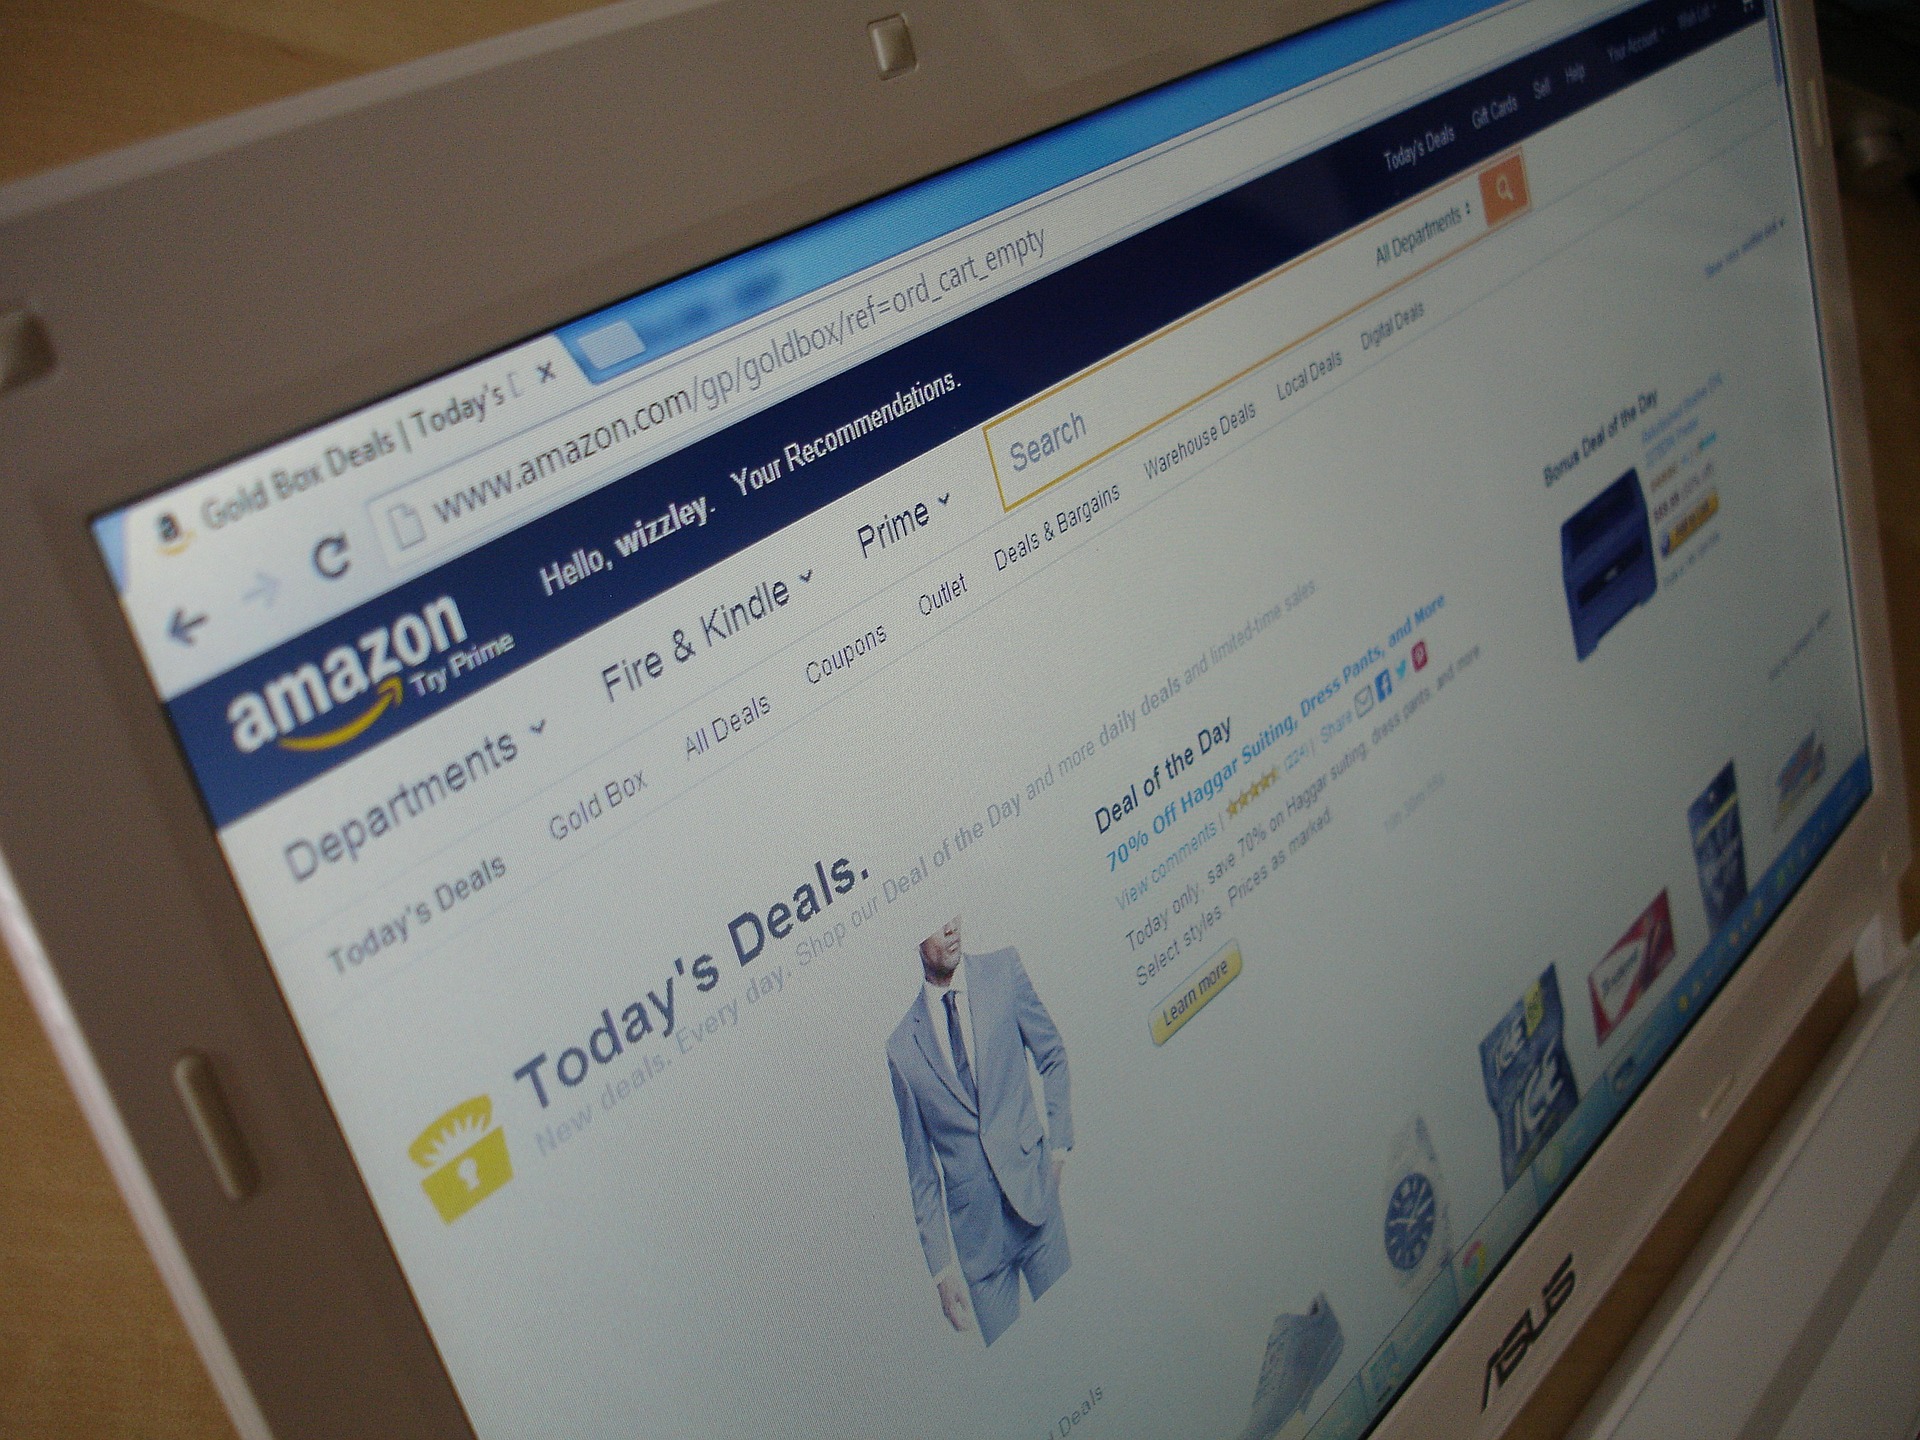 Amazon reviews play a big part in the online shopping experience. Credit: Simon/Pixabay